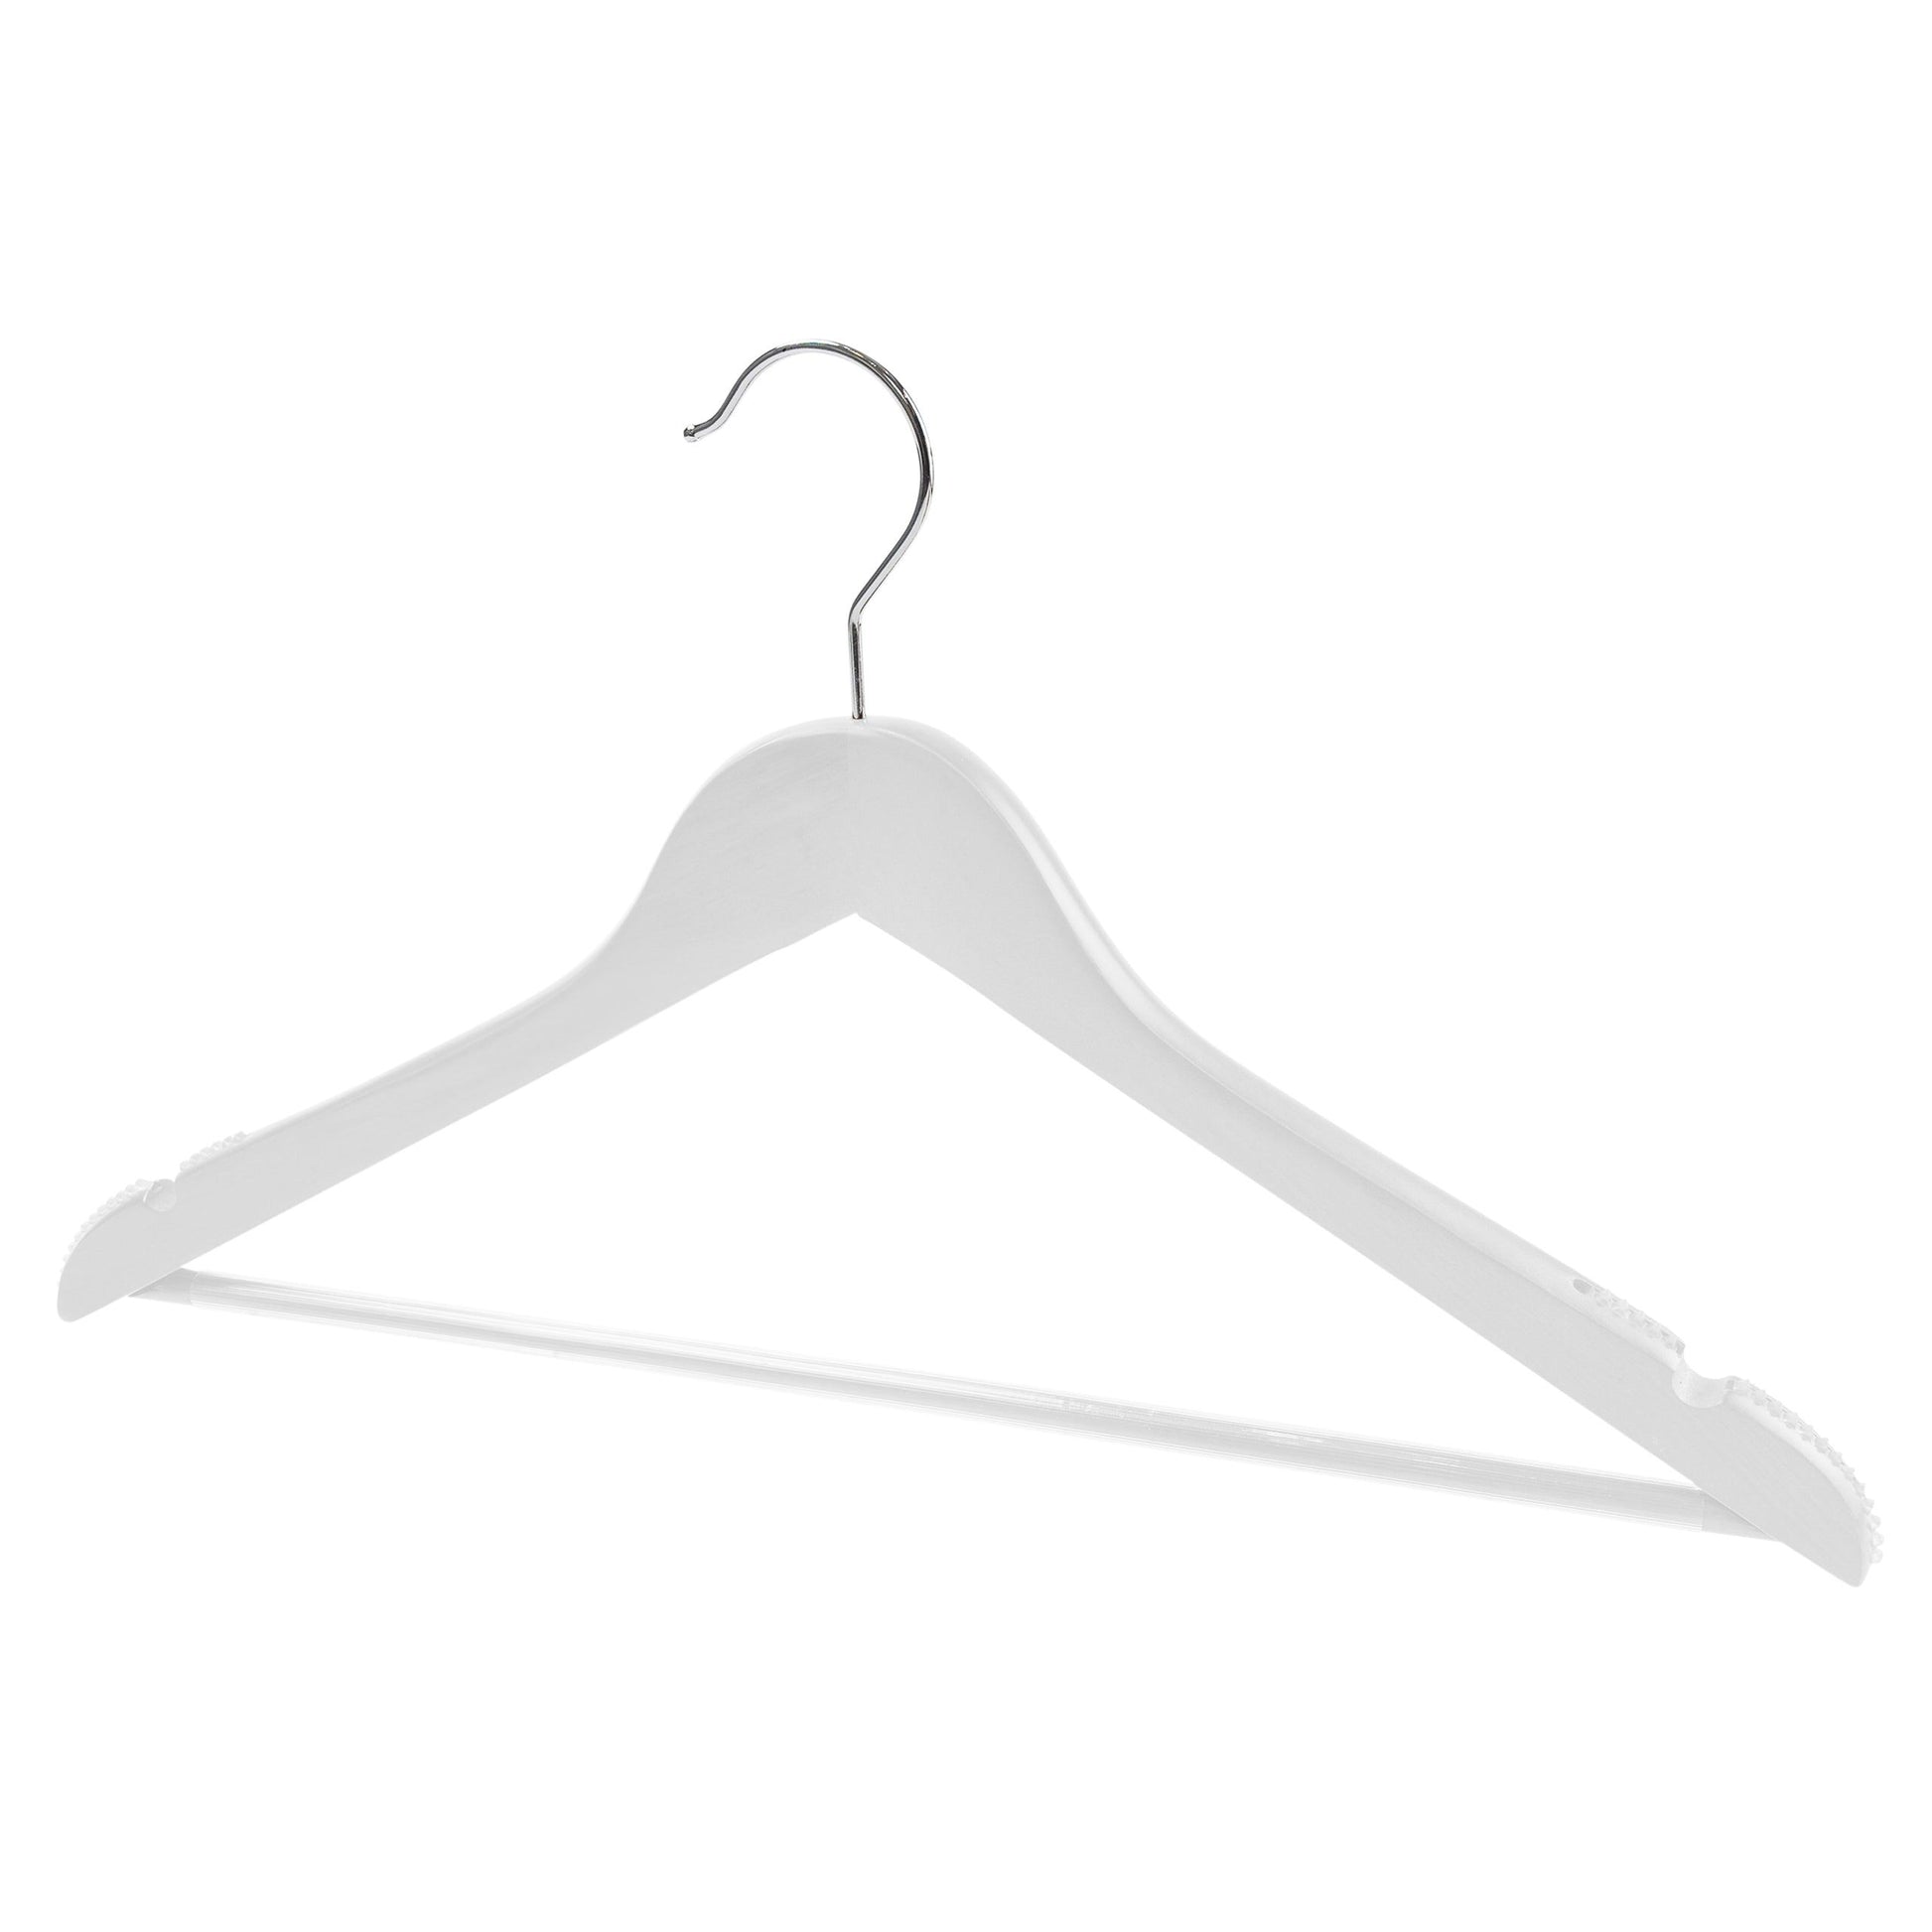 White Wood Suit Hanger With Curved Body Soft Rubber installed on Shoulders & Pant Bar - 44.5cm X 14mm Thick (Sold in 25/50/100) - Hangersforless